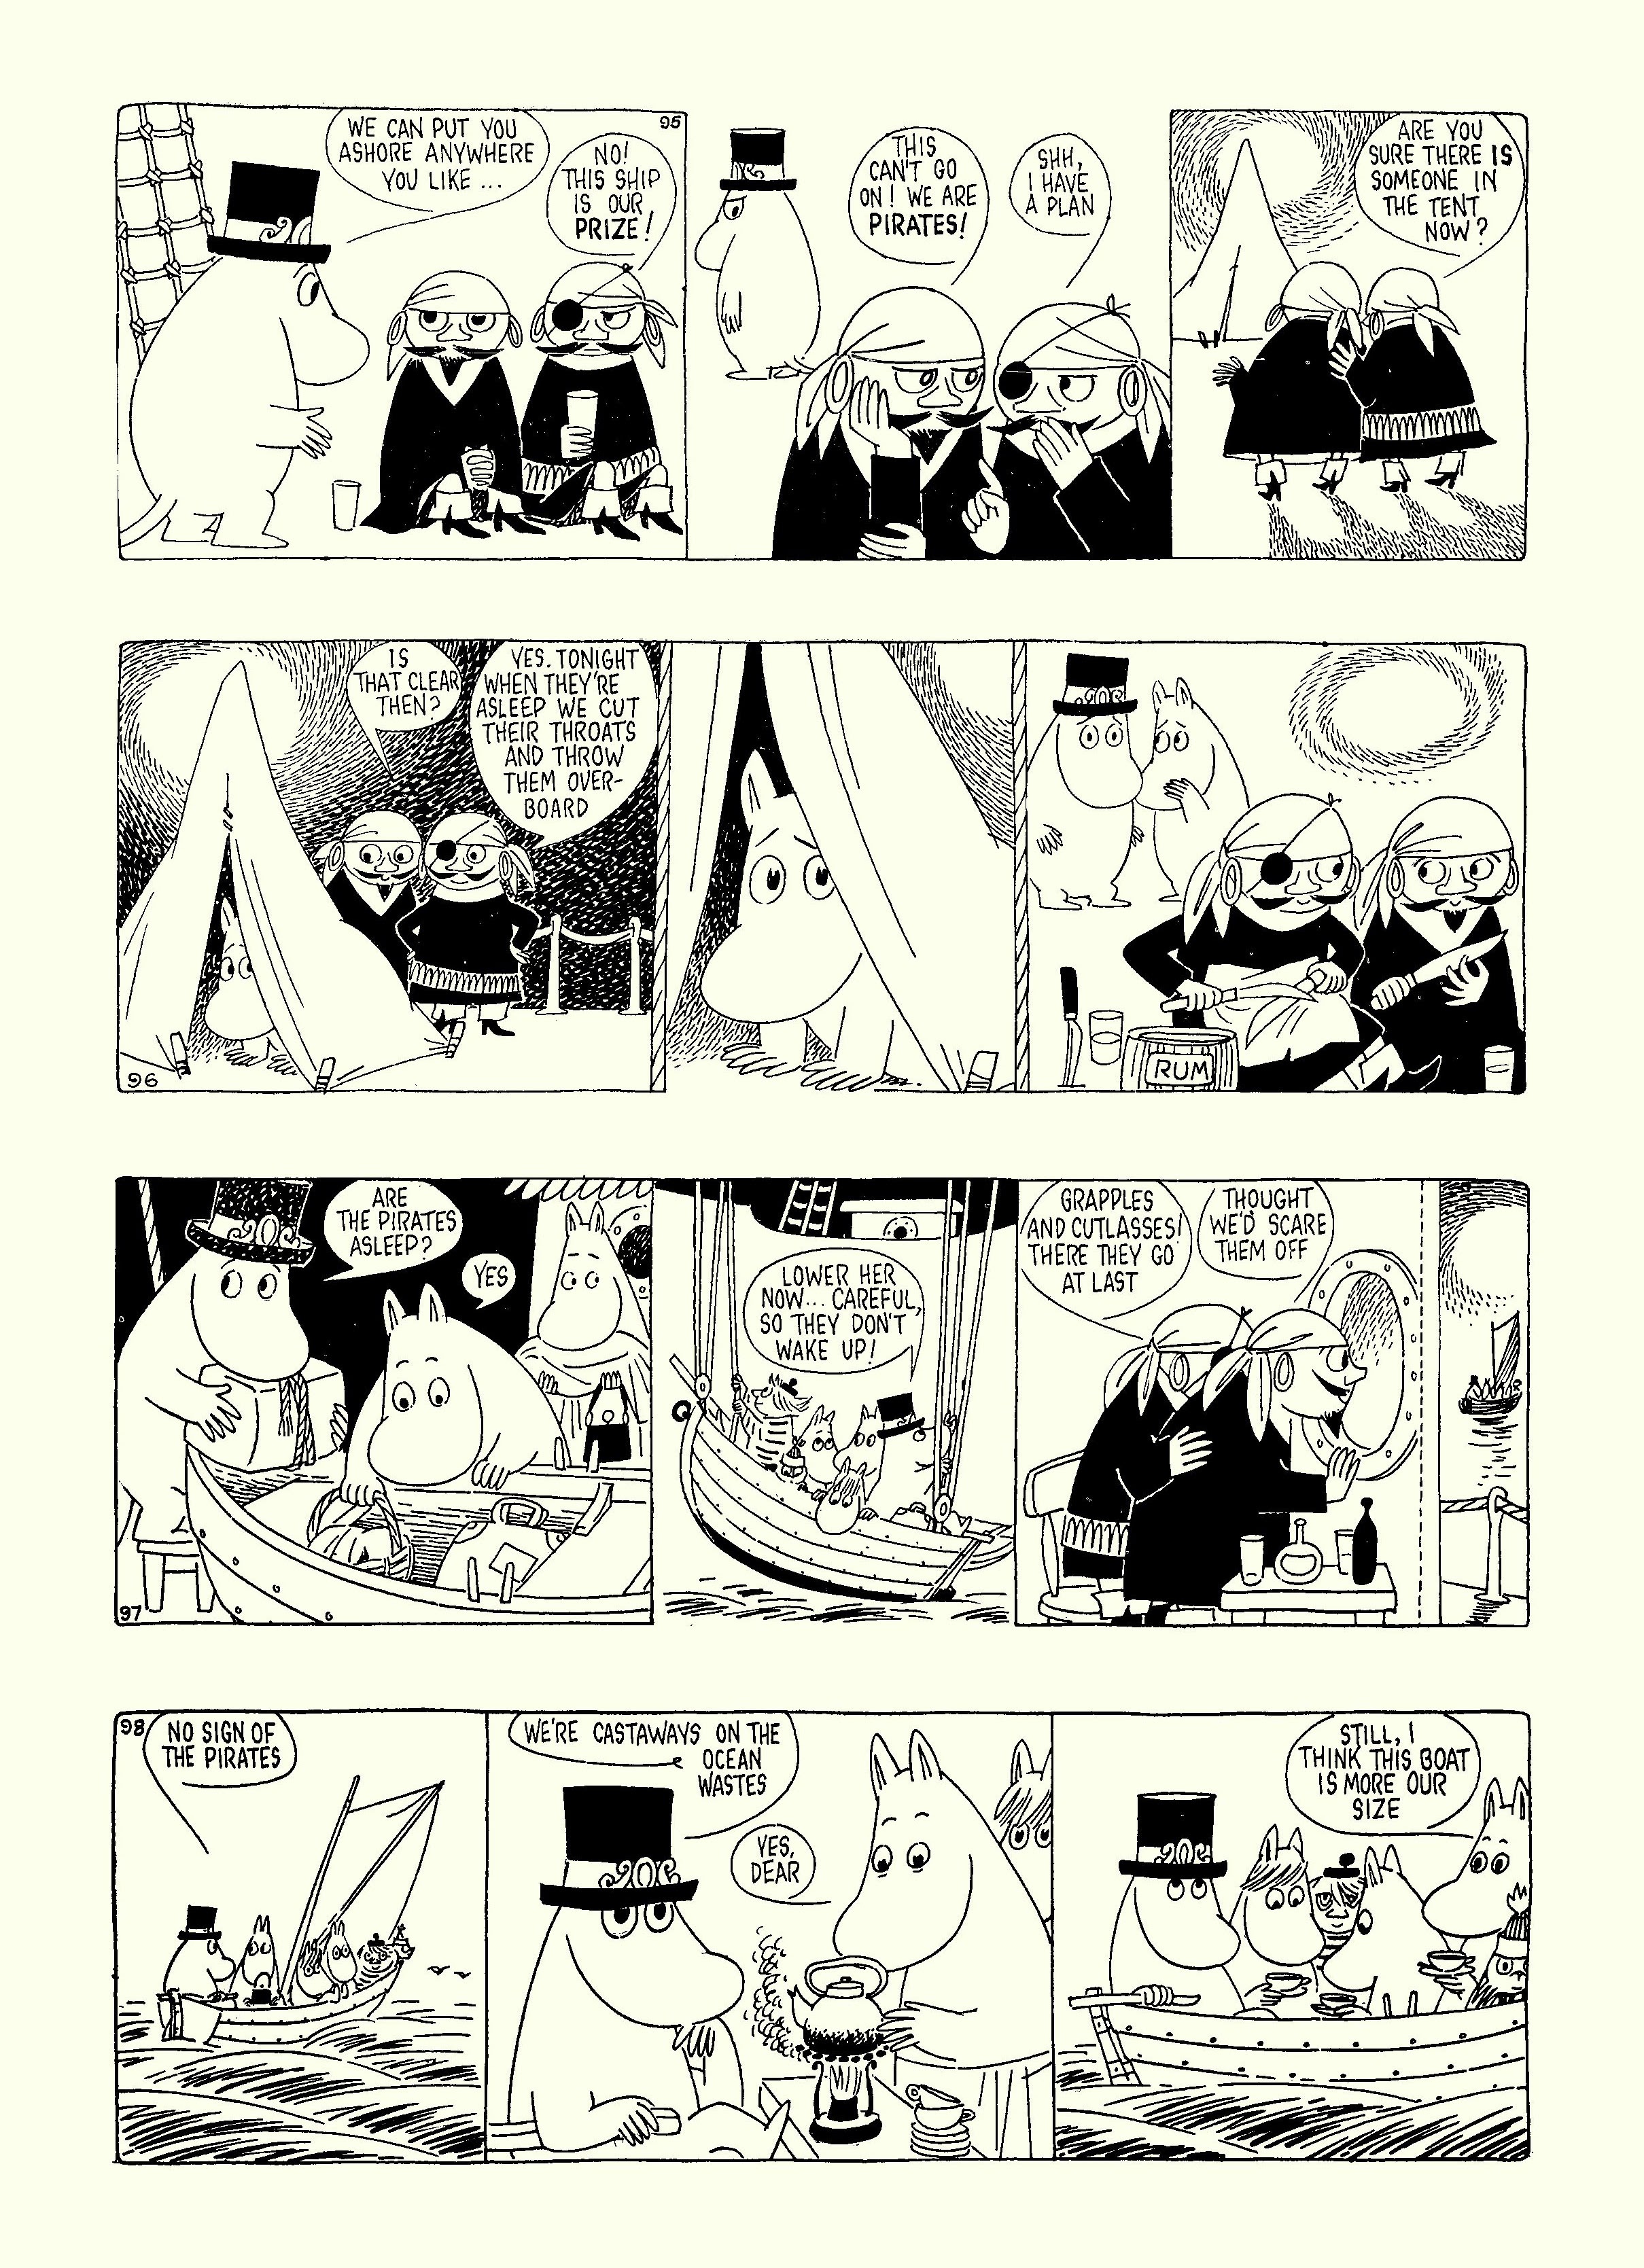 Read online Moomin: The Complete Tove Jansson Comic Strip comic -  Issue # TPB 5 - 55